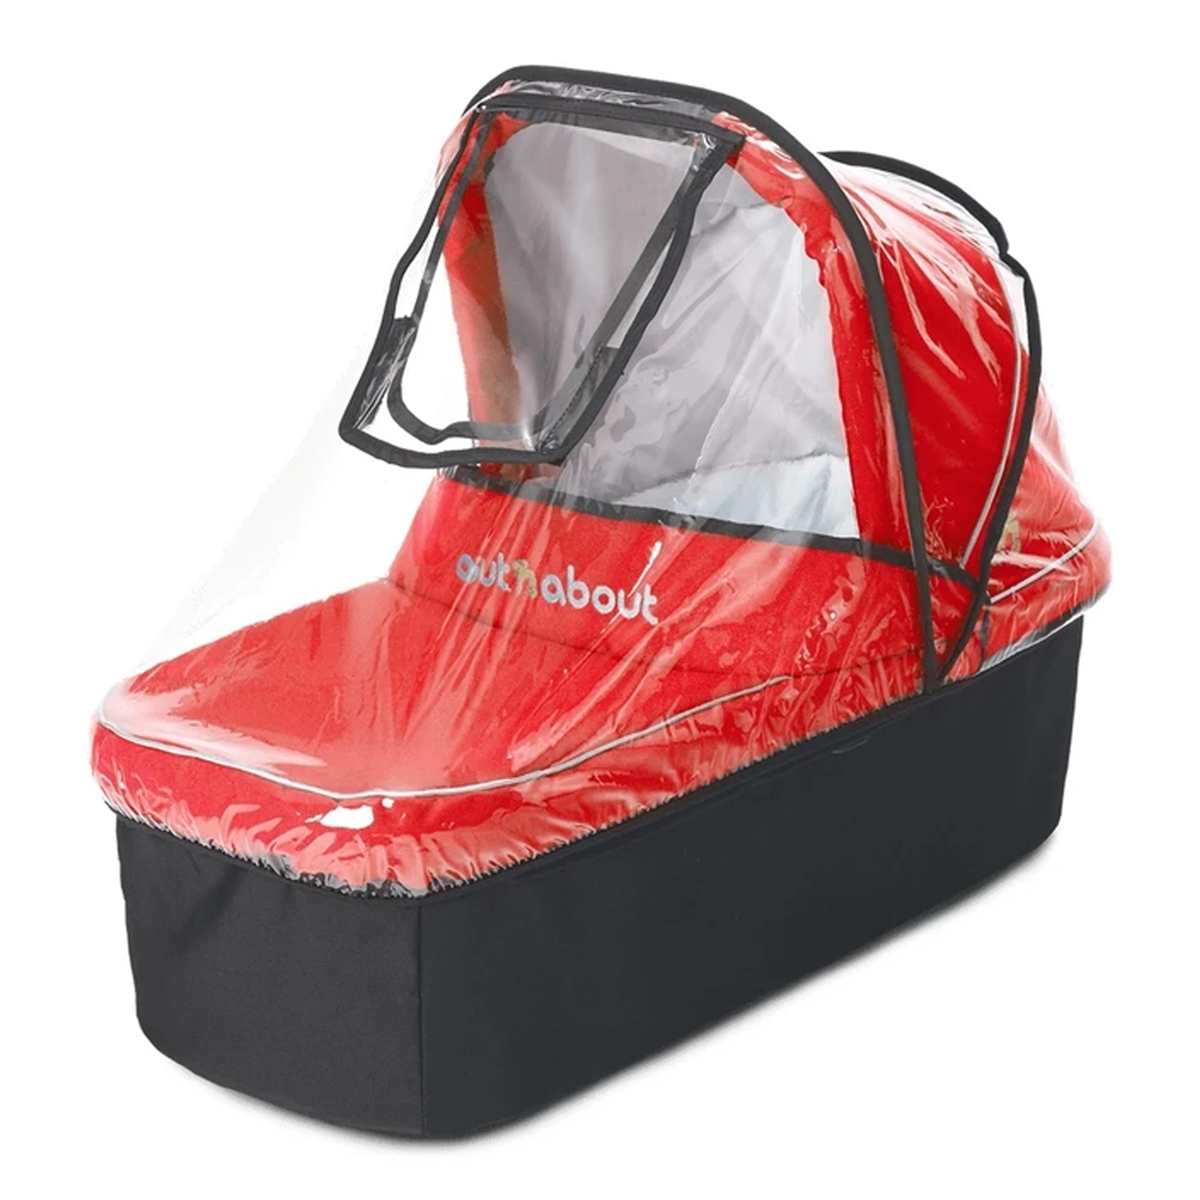 https://www.kiddies-kingdom.com/148939-thickbox_default/out-n-about-carrycot-raincover-.jpg